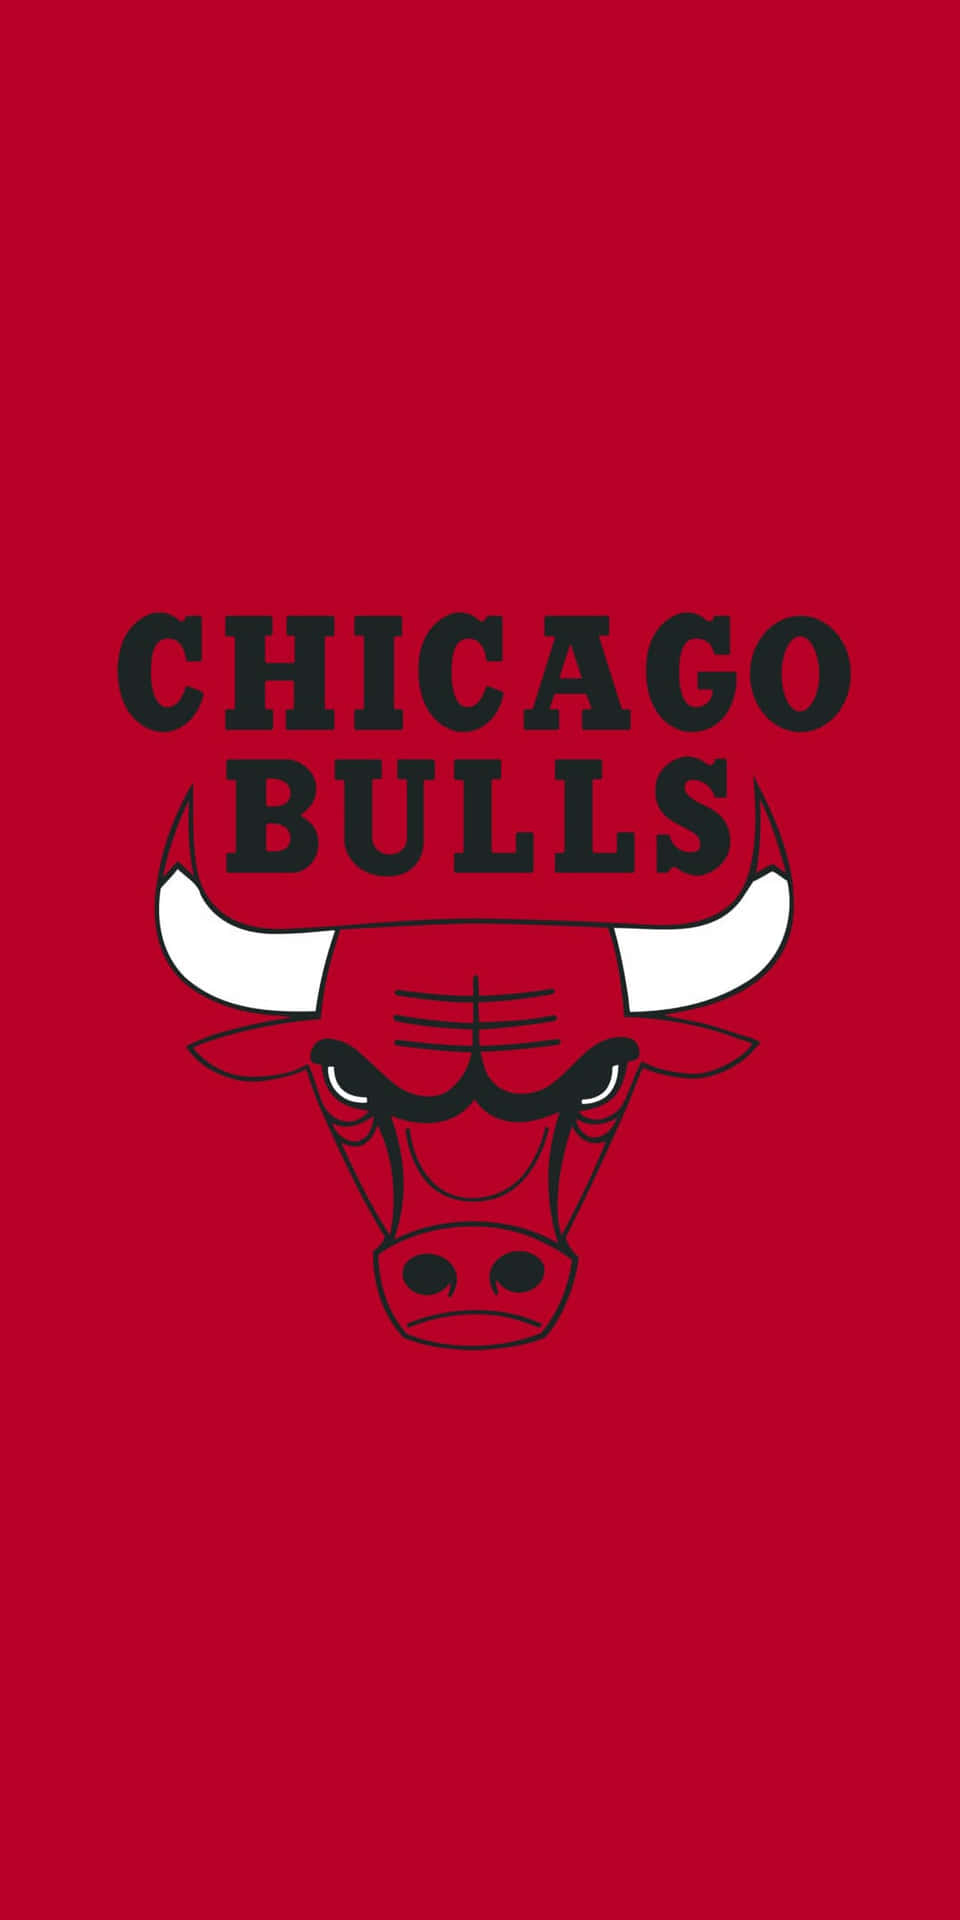 Show Off Your Bulls Fandom With This Dynamic Iphone Wallpaper! Background